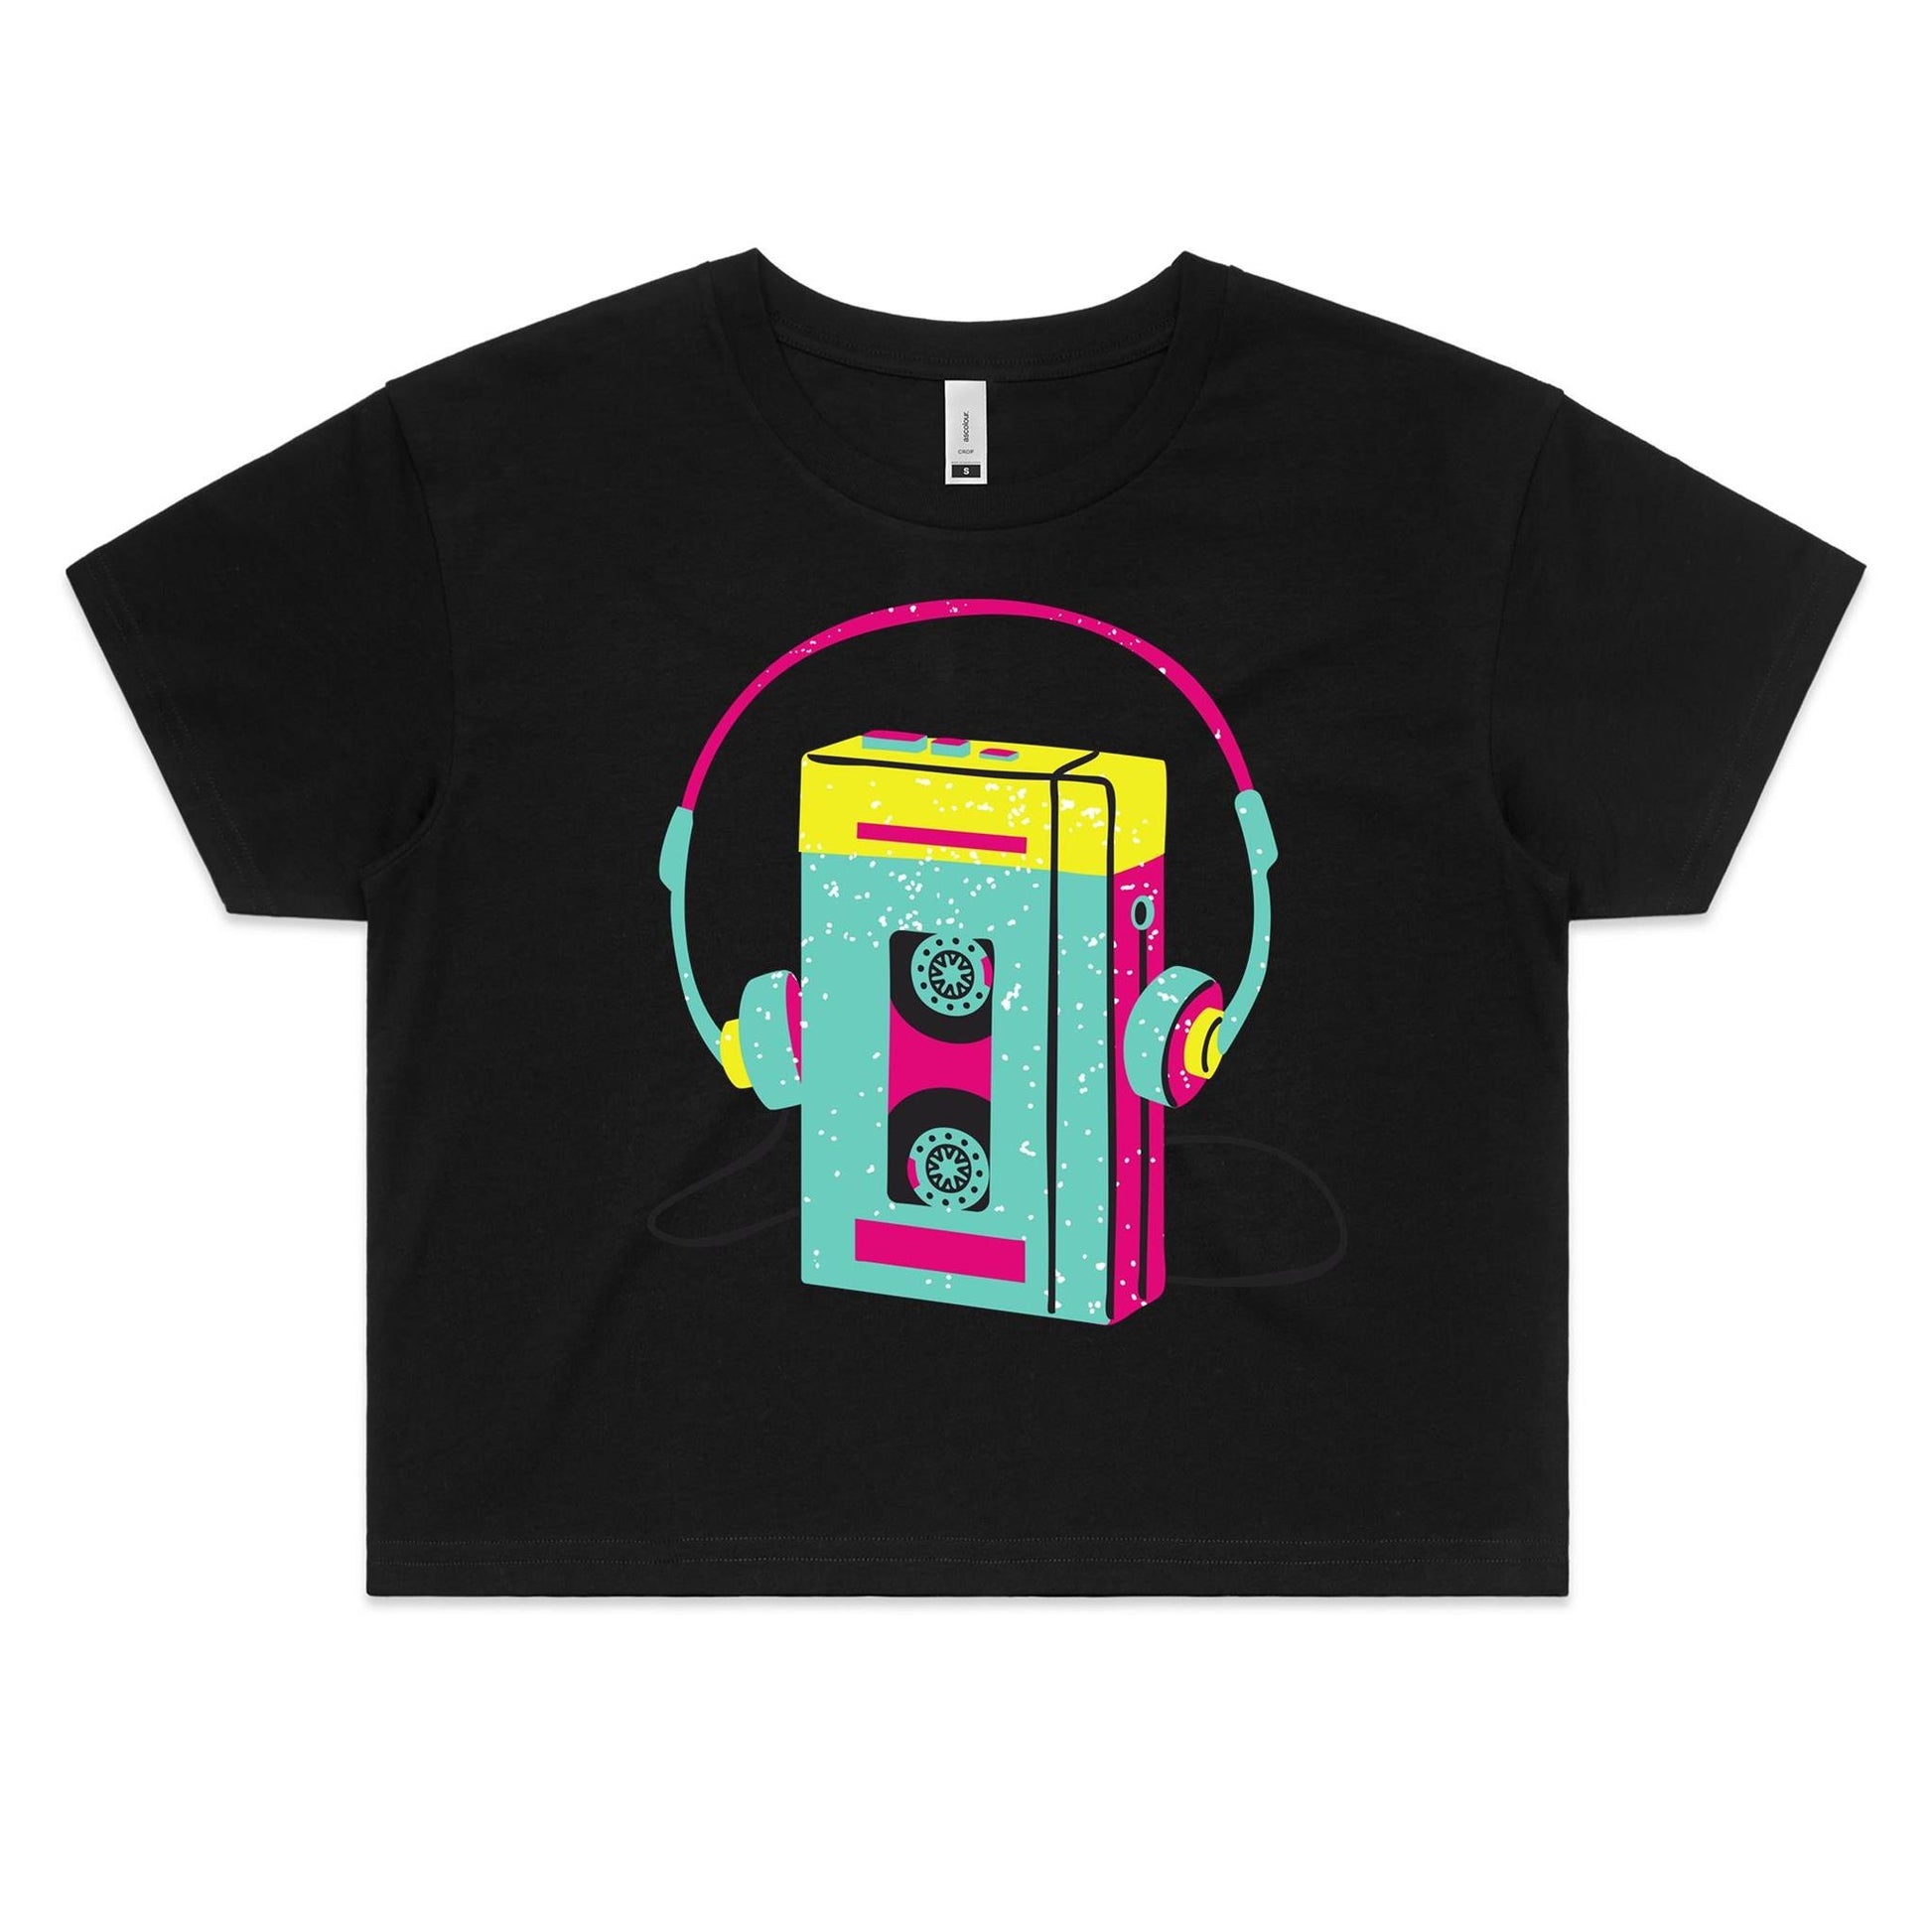 Wired For Sound, Music Player - Women's Crop Tee Black Womens Crop Top Music Retro Womens